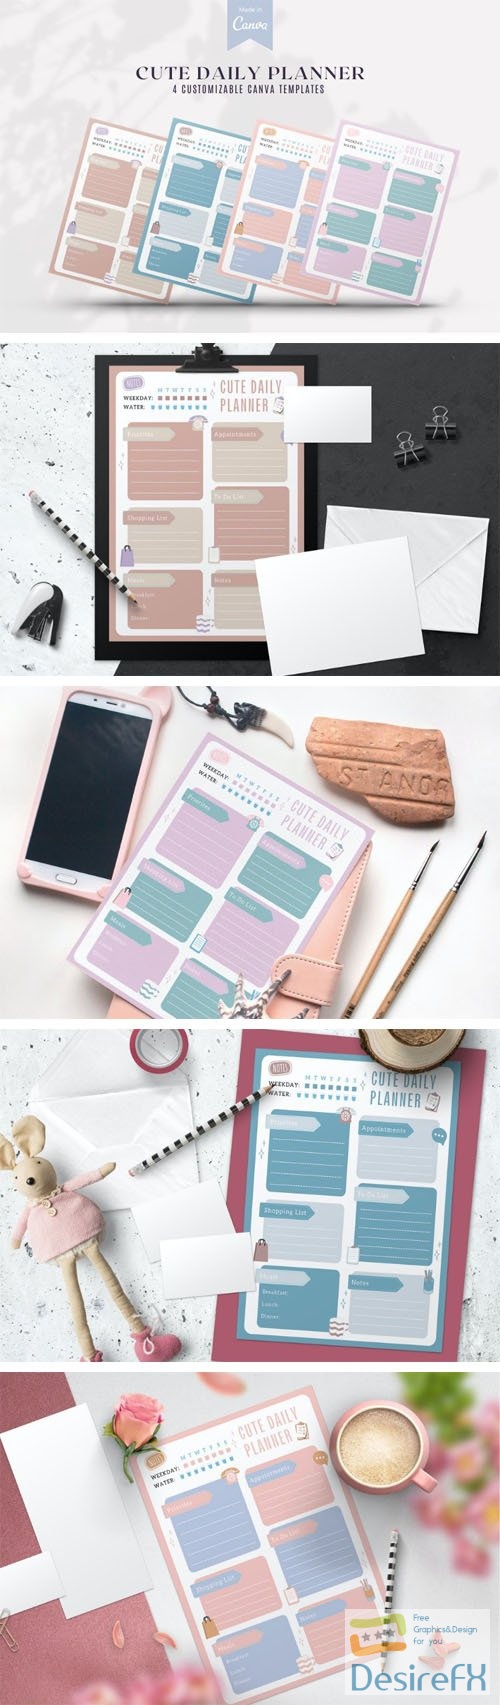 Cute Daily Planner - 4 Customizable Canva PDF Templates